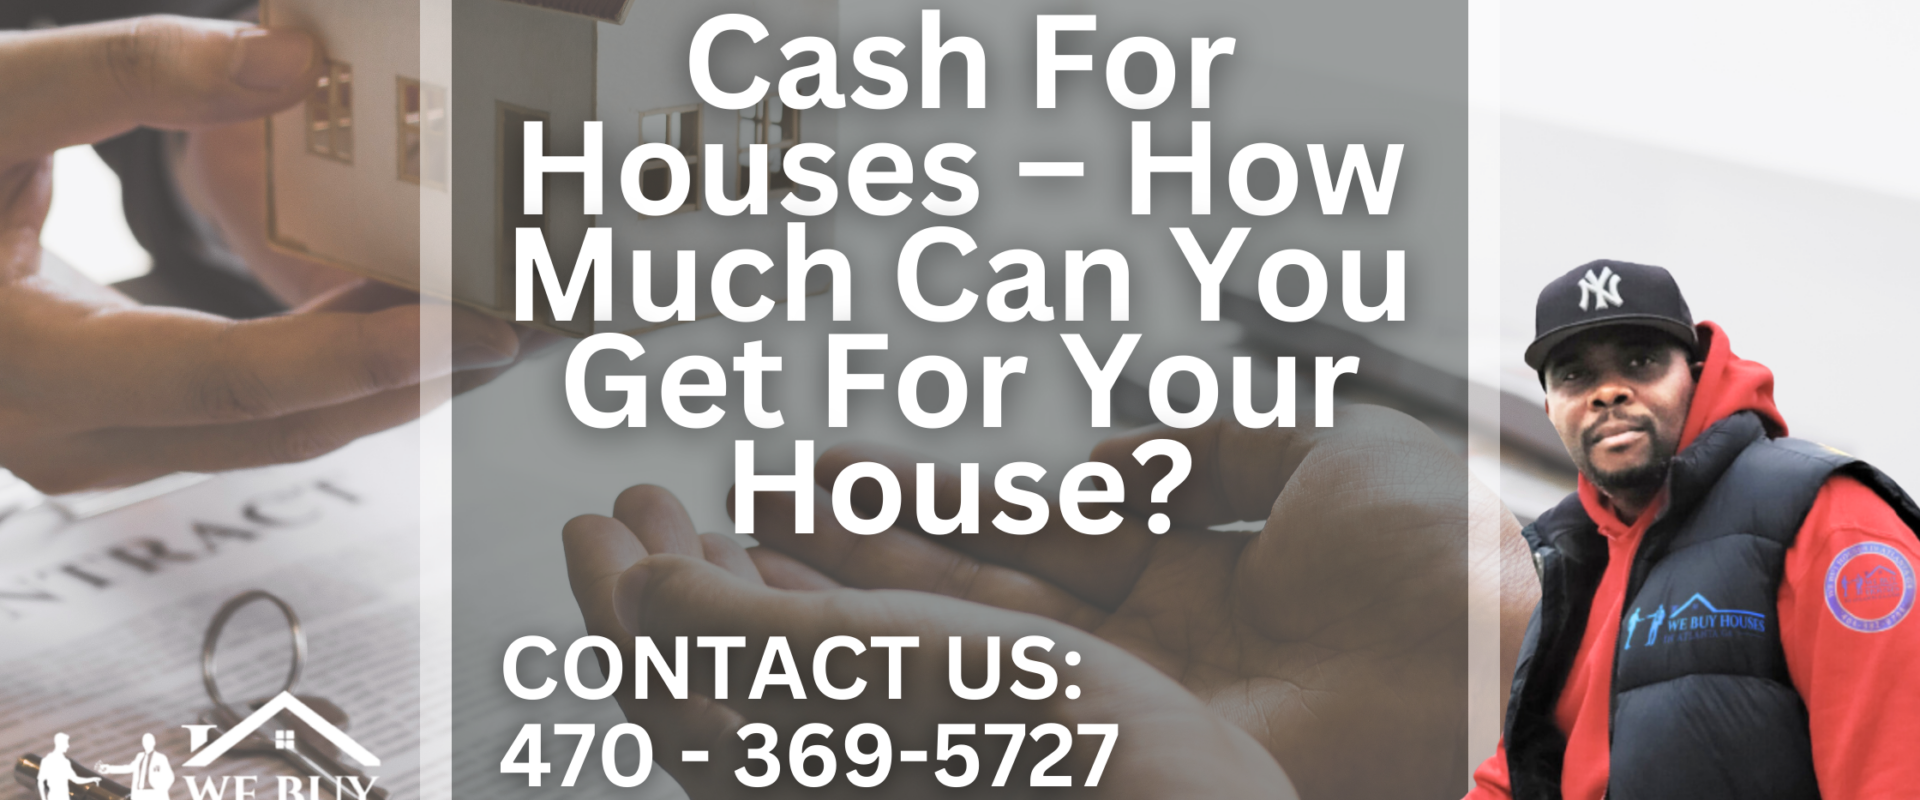 Cash For Houses – How Much Can You Get For Your House?